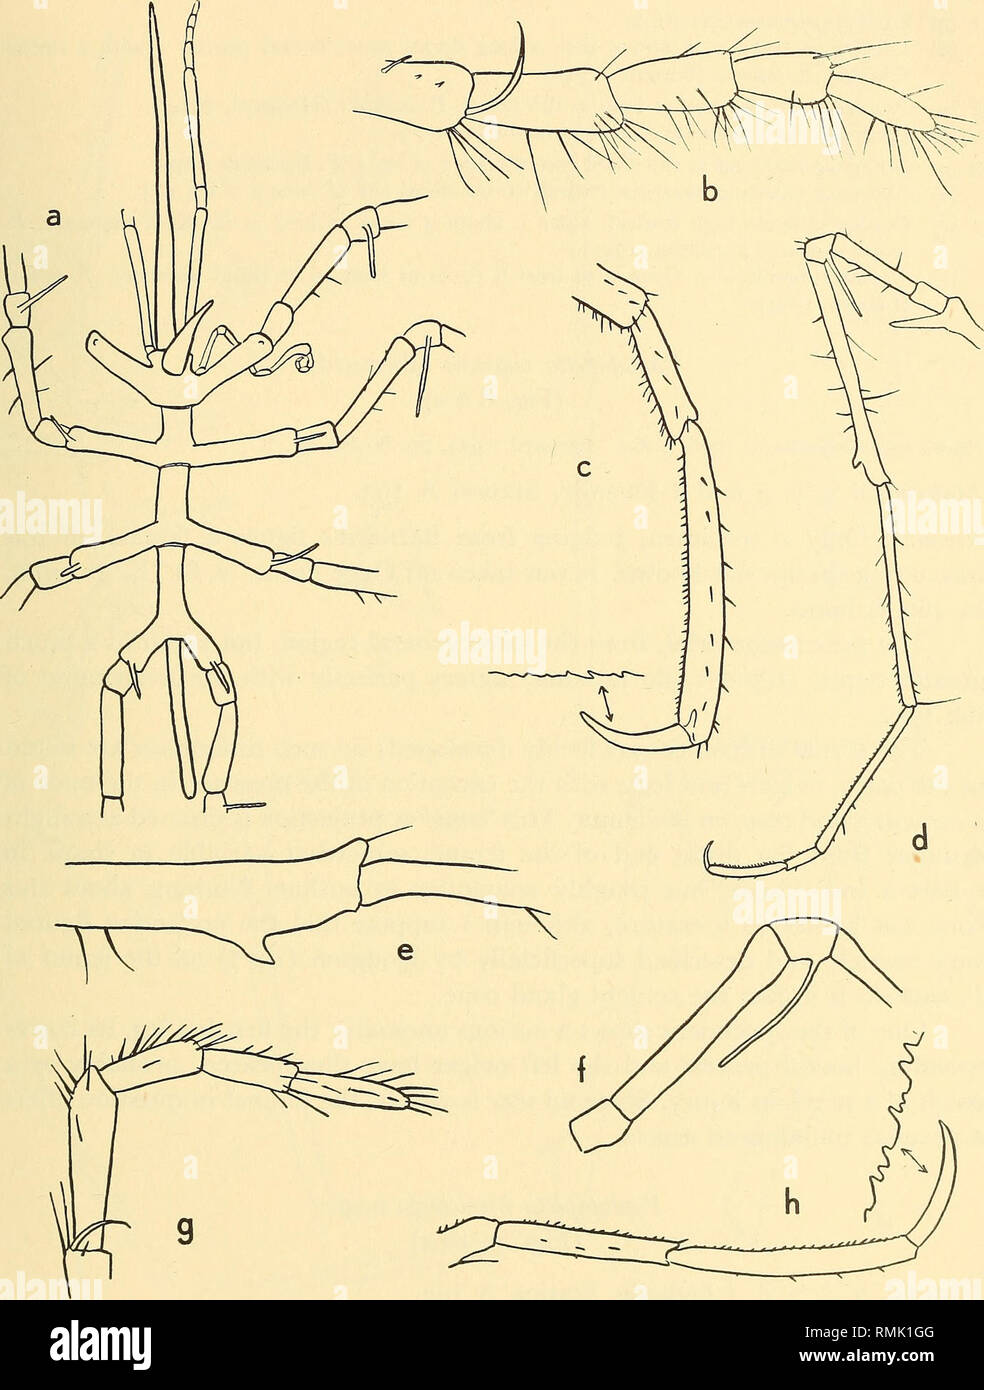 . Annals of the South African Museum = Annale van die Suid-Afrikaanse Museum. Natural history. SOUTH AFRICAN DEEP-SEA PYGNOGONIDA 335. Fig. 8. (a-e) Pantopipetta capensis (Barnard), a, trunk in dorsal view ($); b, distal segments of the palp (o*); c, distal segments of the third leg ($); d, third leg (&lt;$); e, terminal part of the femur, with the cement gland cone (&lt;$). (f-h) Pantopipetta weberi (Loman), $ (holotype). /, coxae; g, distal part of the palp; h, distal segments of the leg.. Please note that these images are extracted from scanned page images that may have been digitally enhan Stock Photo